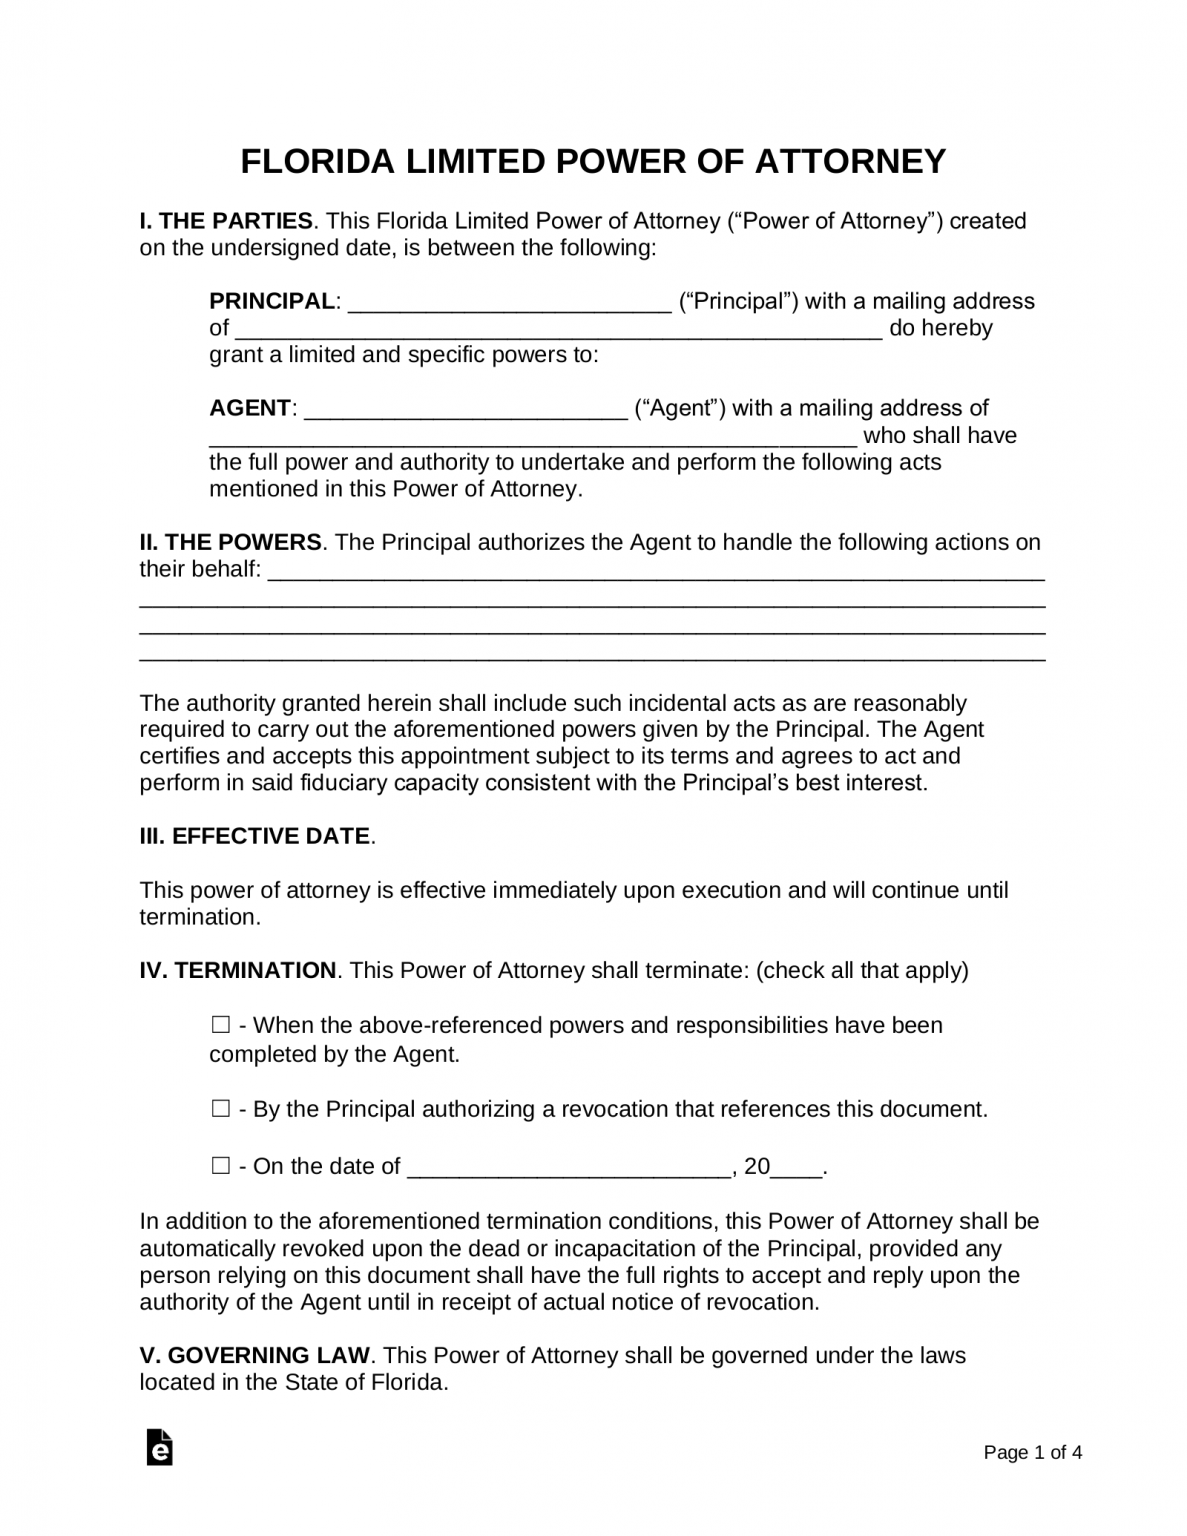 free-florida-limited-power-of-attorney-form-pdf-word-eforms